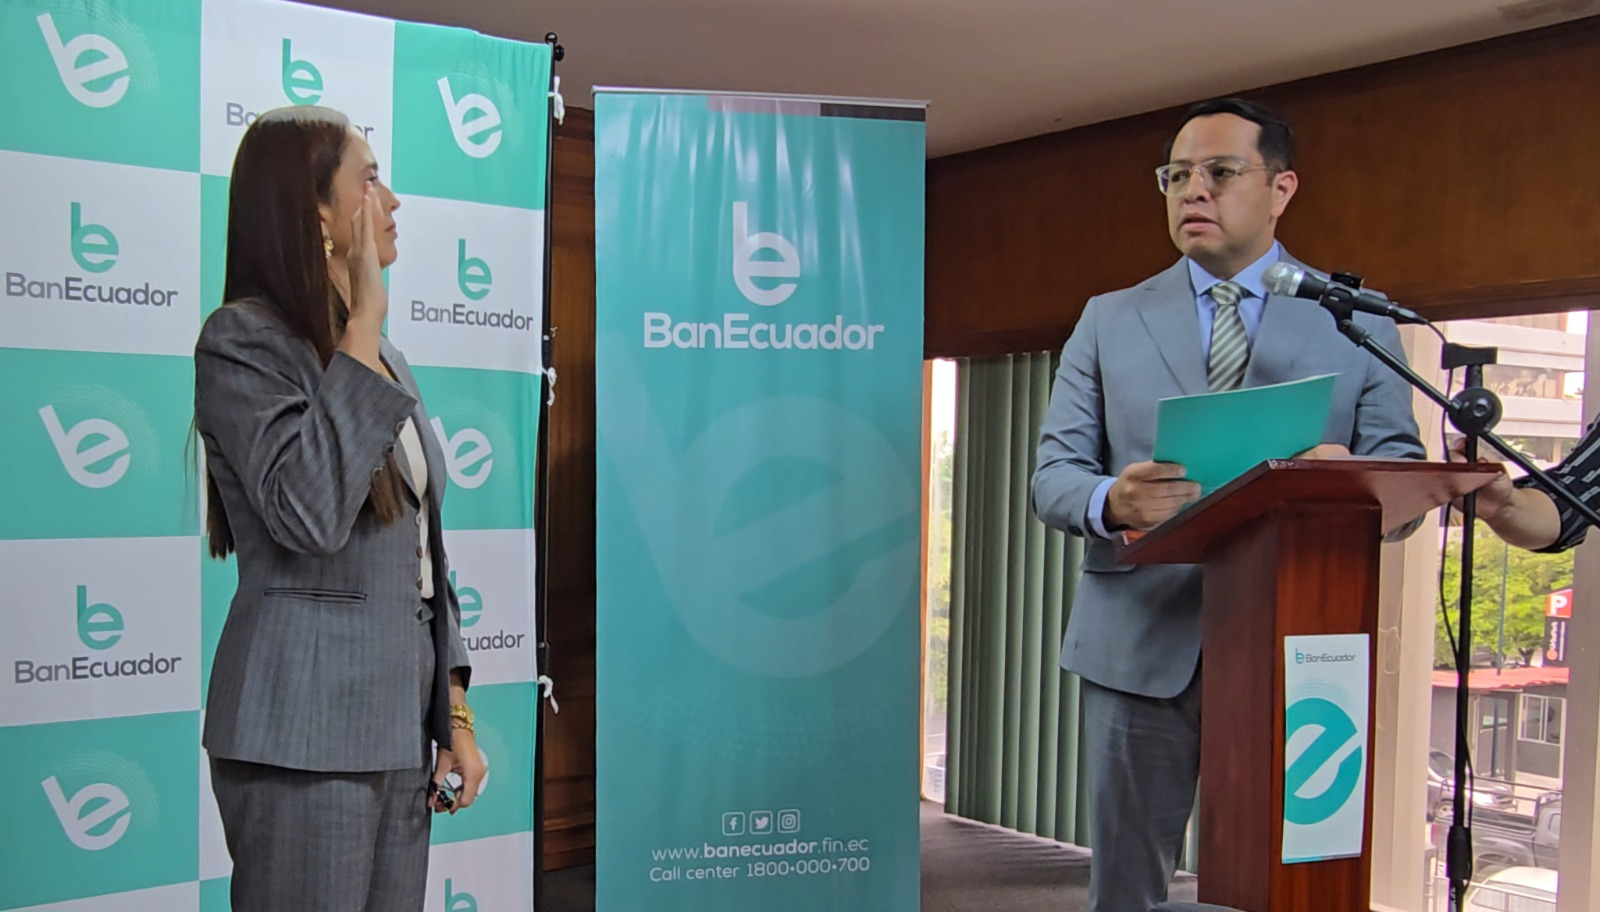 Maricela Dolores Vera Crespo assumed the position of General Manager of BanEcuador